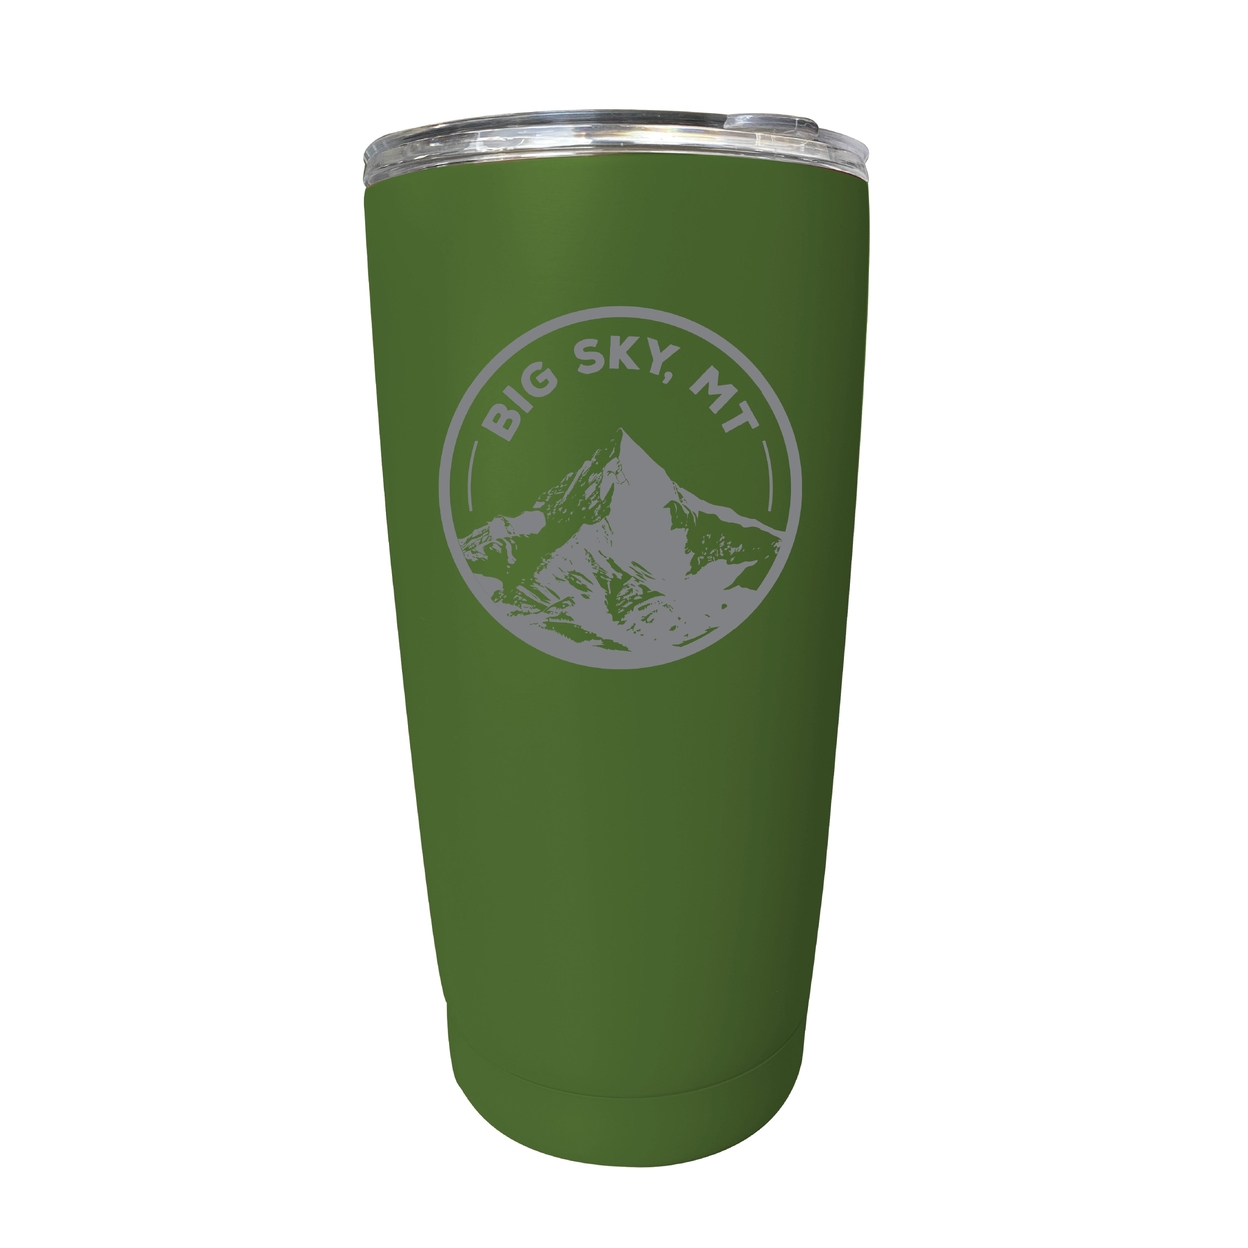 Big Sky Montana Souvenir 16 Oz Engraved Stainless Steel Insulated Tumbler - Green,,4-Pack